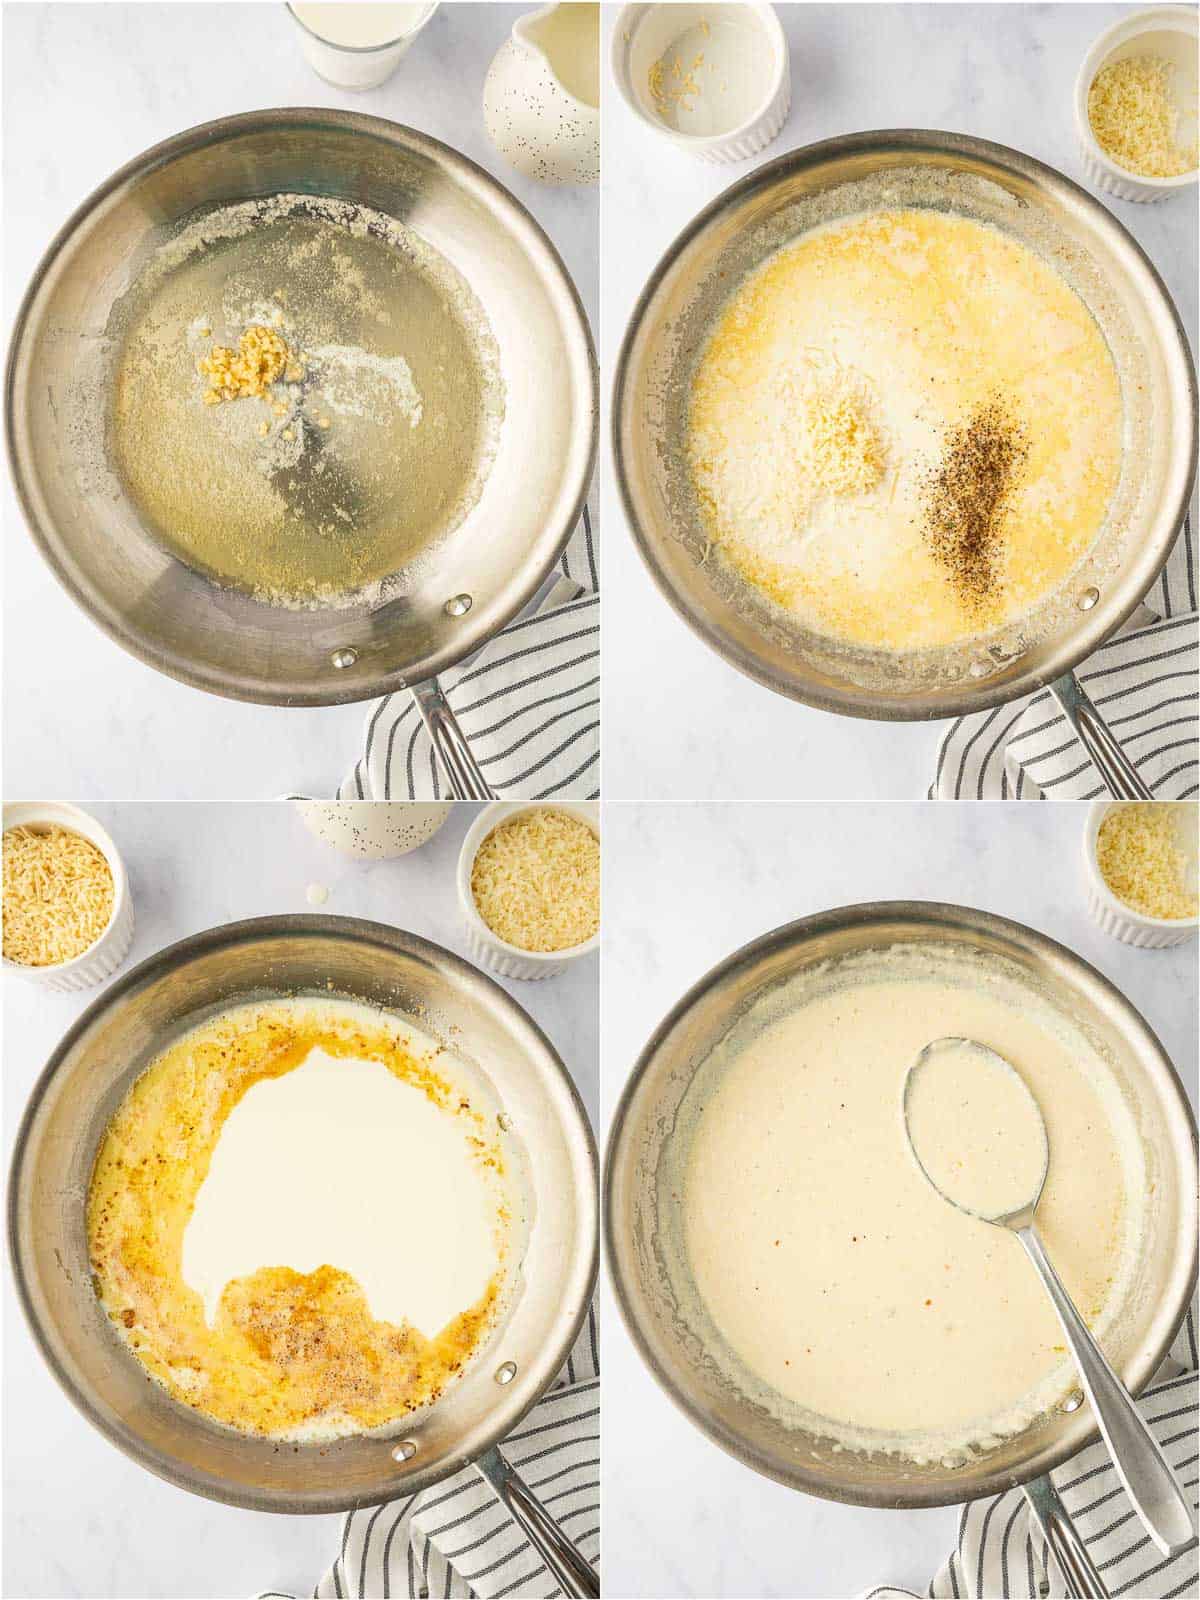 steps showing how to make alfredo sauce.